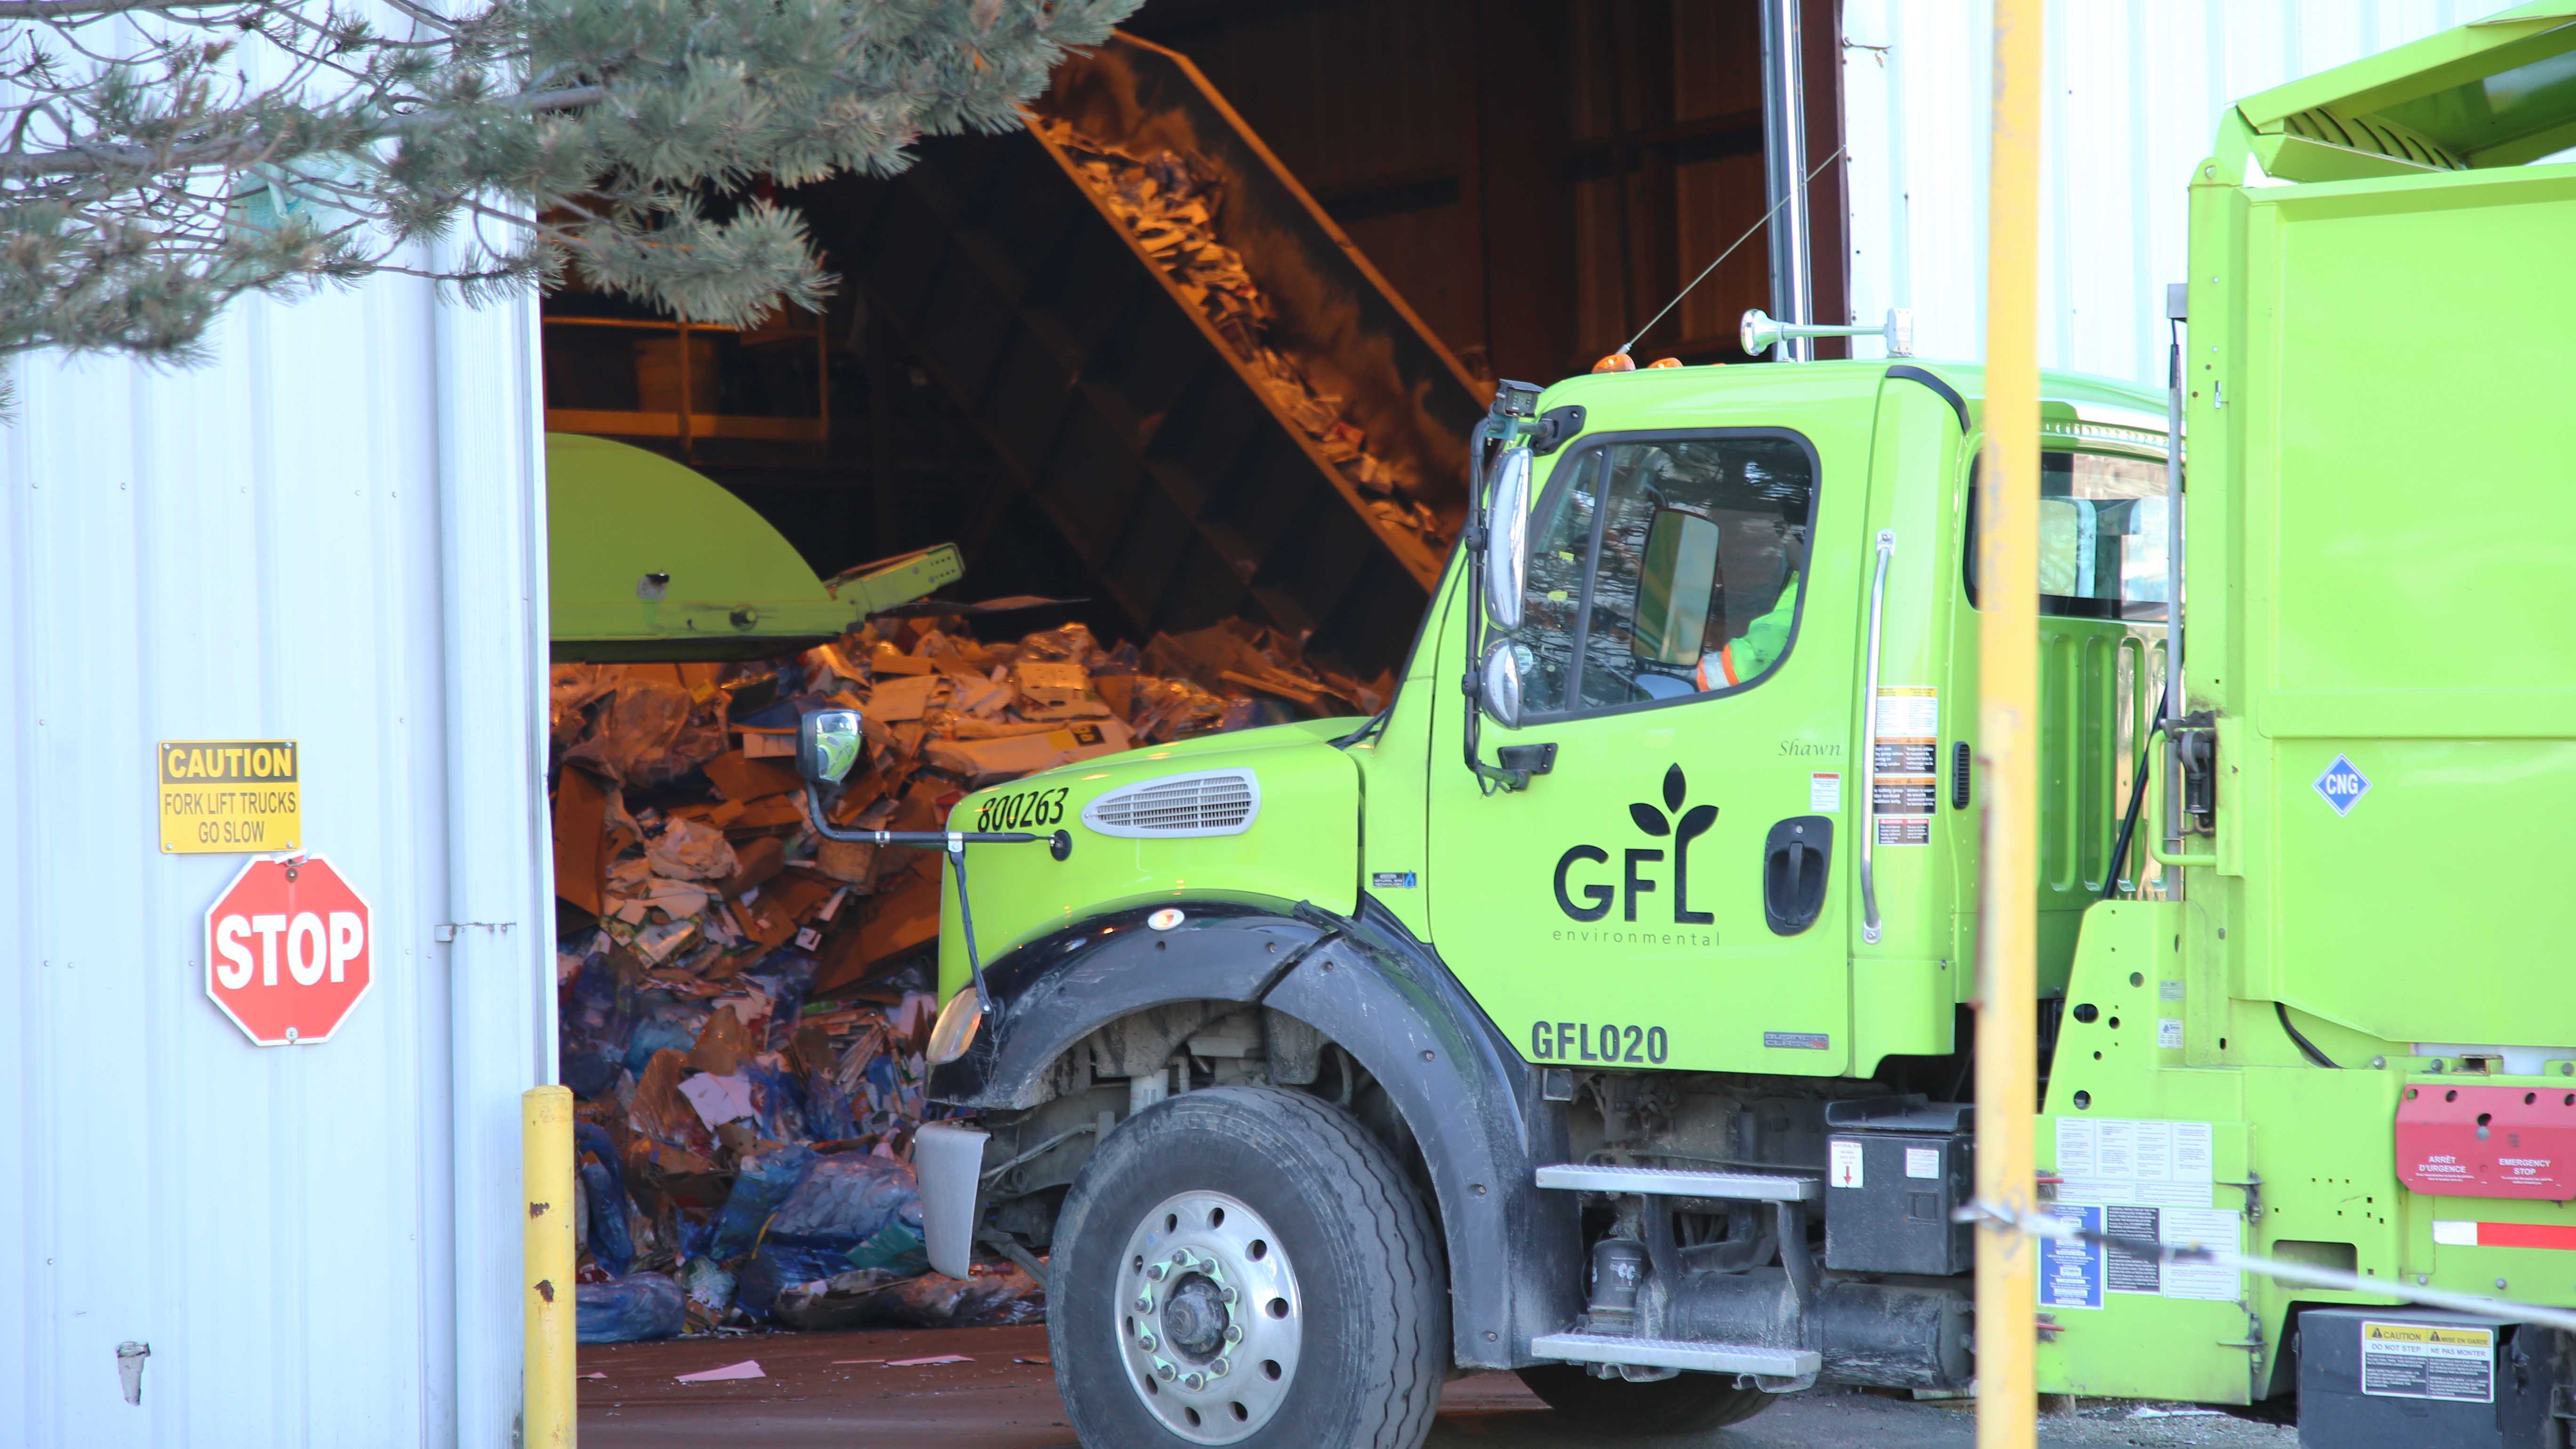 GFL Environmental trucks like this one will soon have side guards installed.